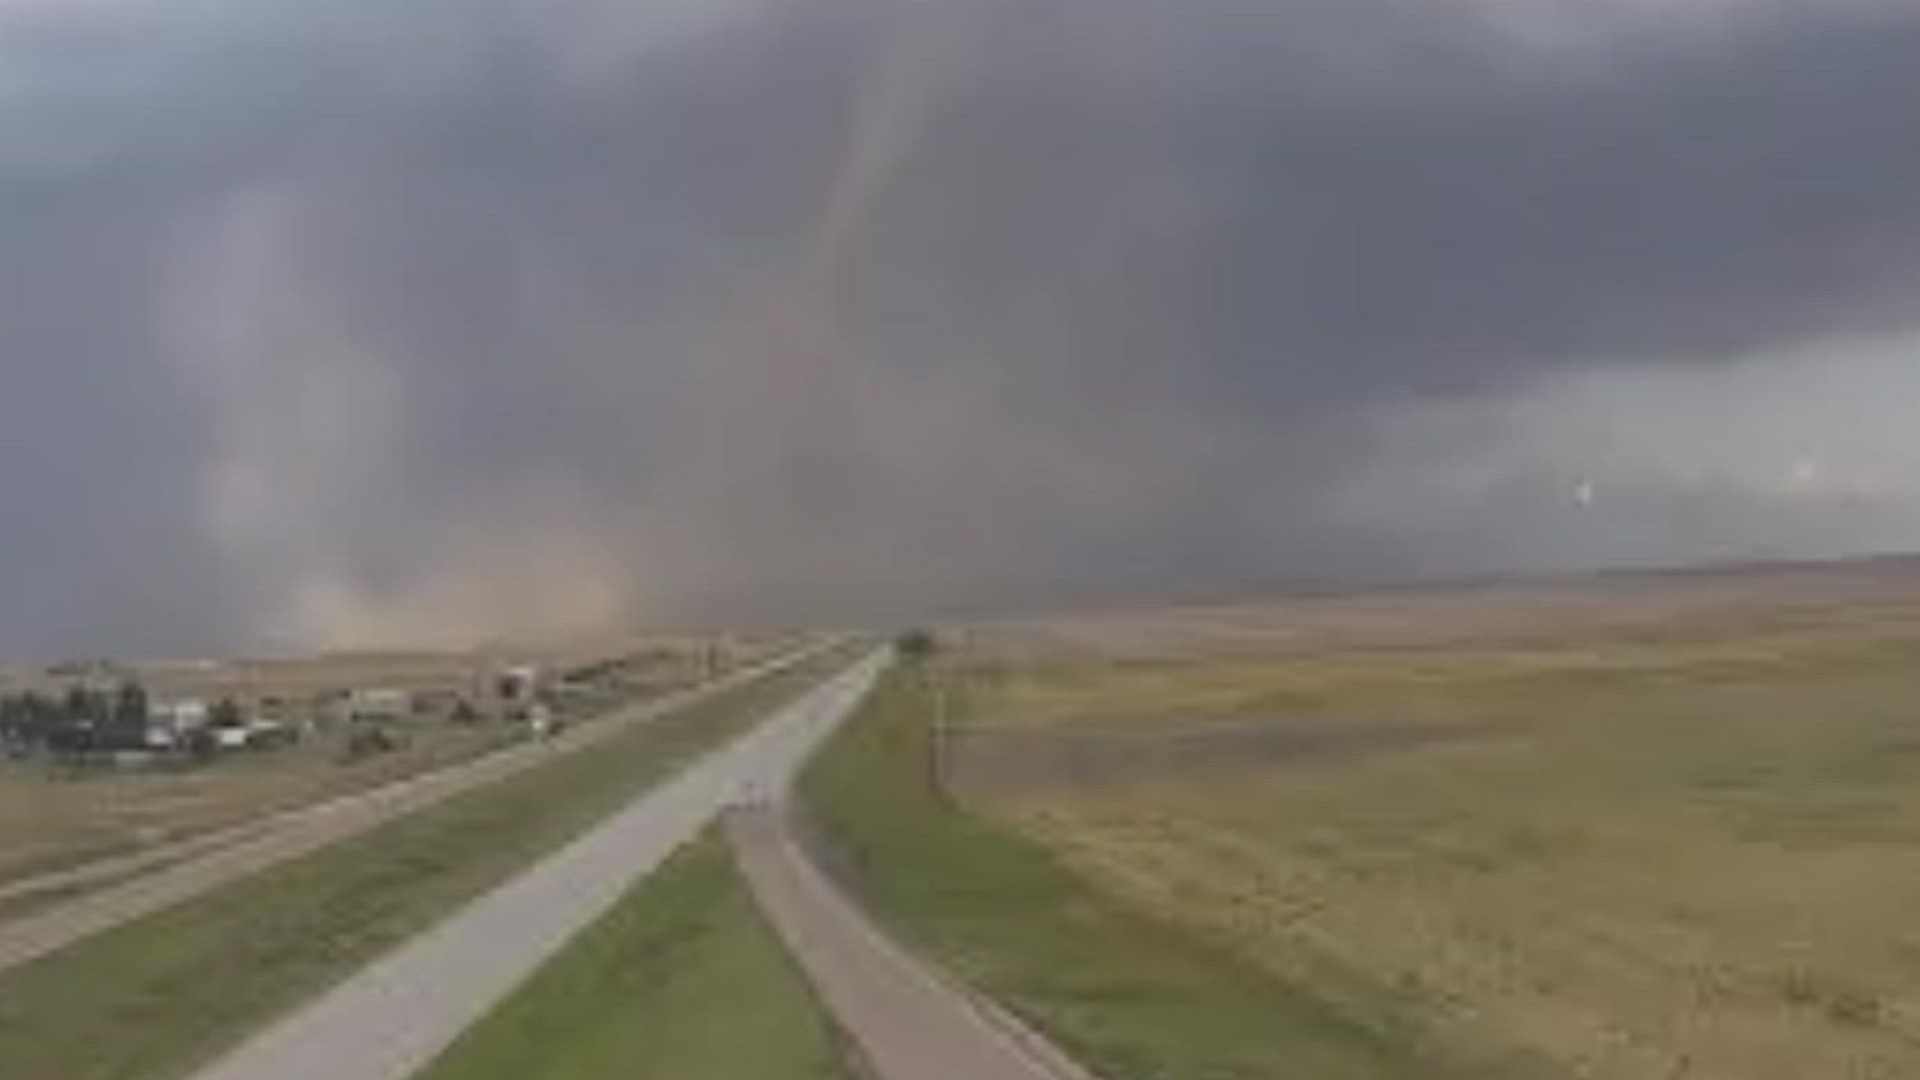 A Tornado Warning was in effect as a tornado crossed Interstate 70 in Kit Carson County, Colorado.